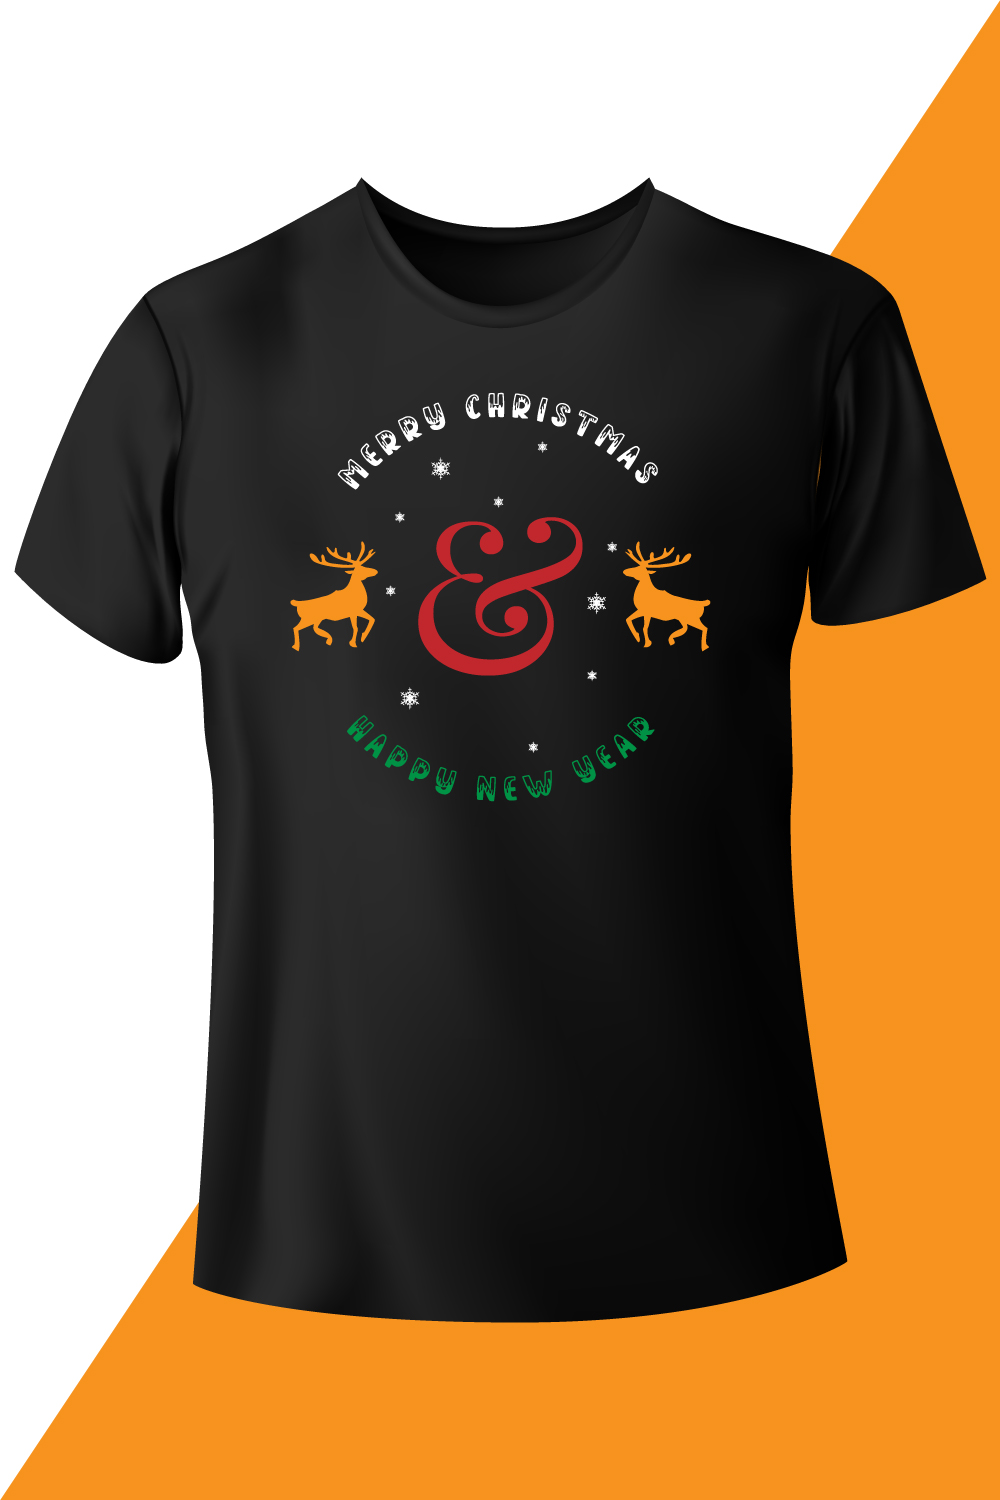 Image of a black t-shirt with an enchanting inscription happy new year.